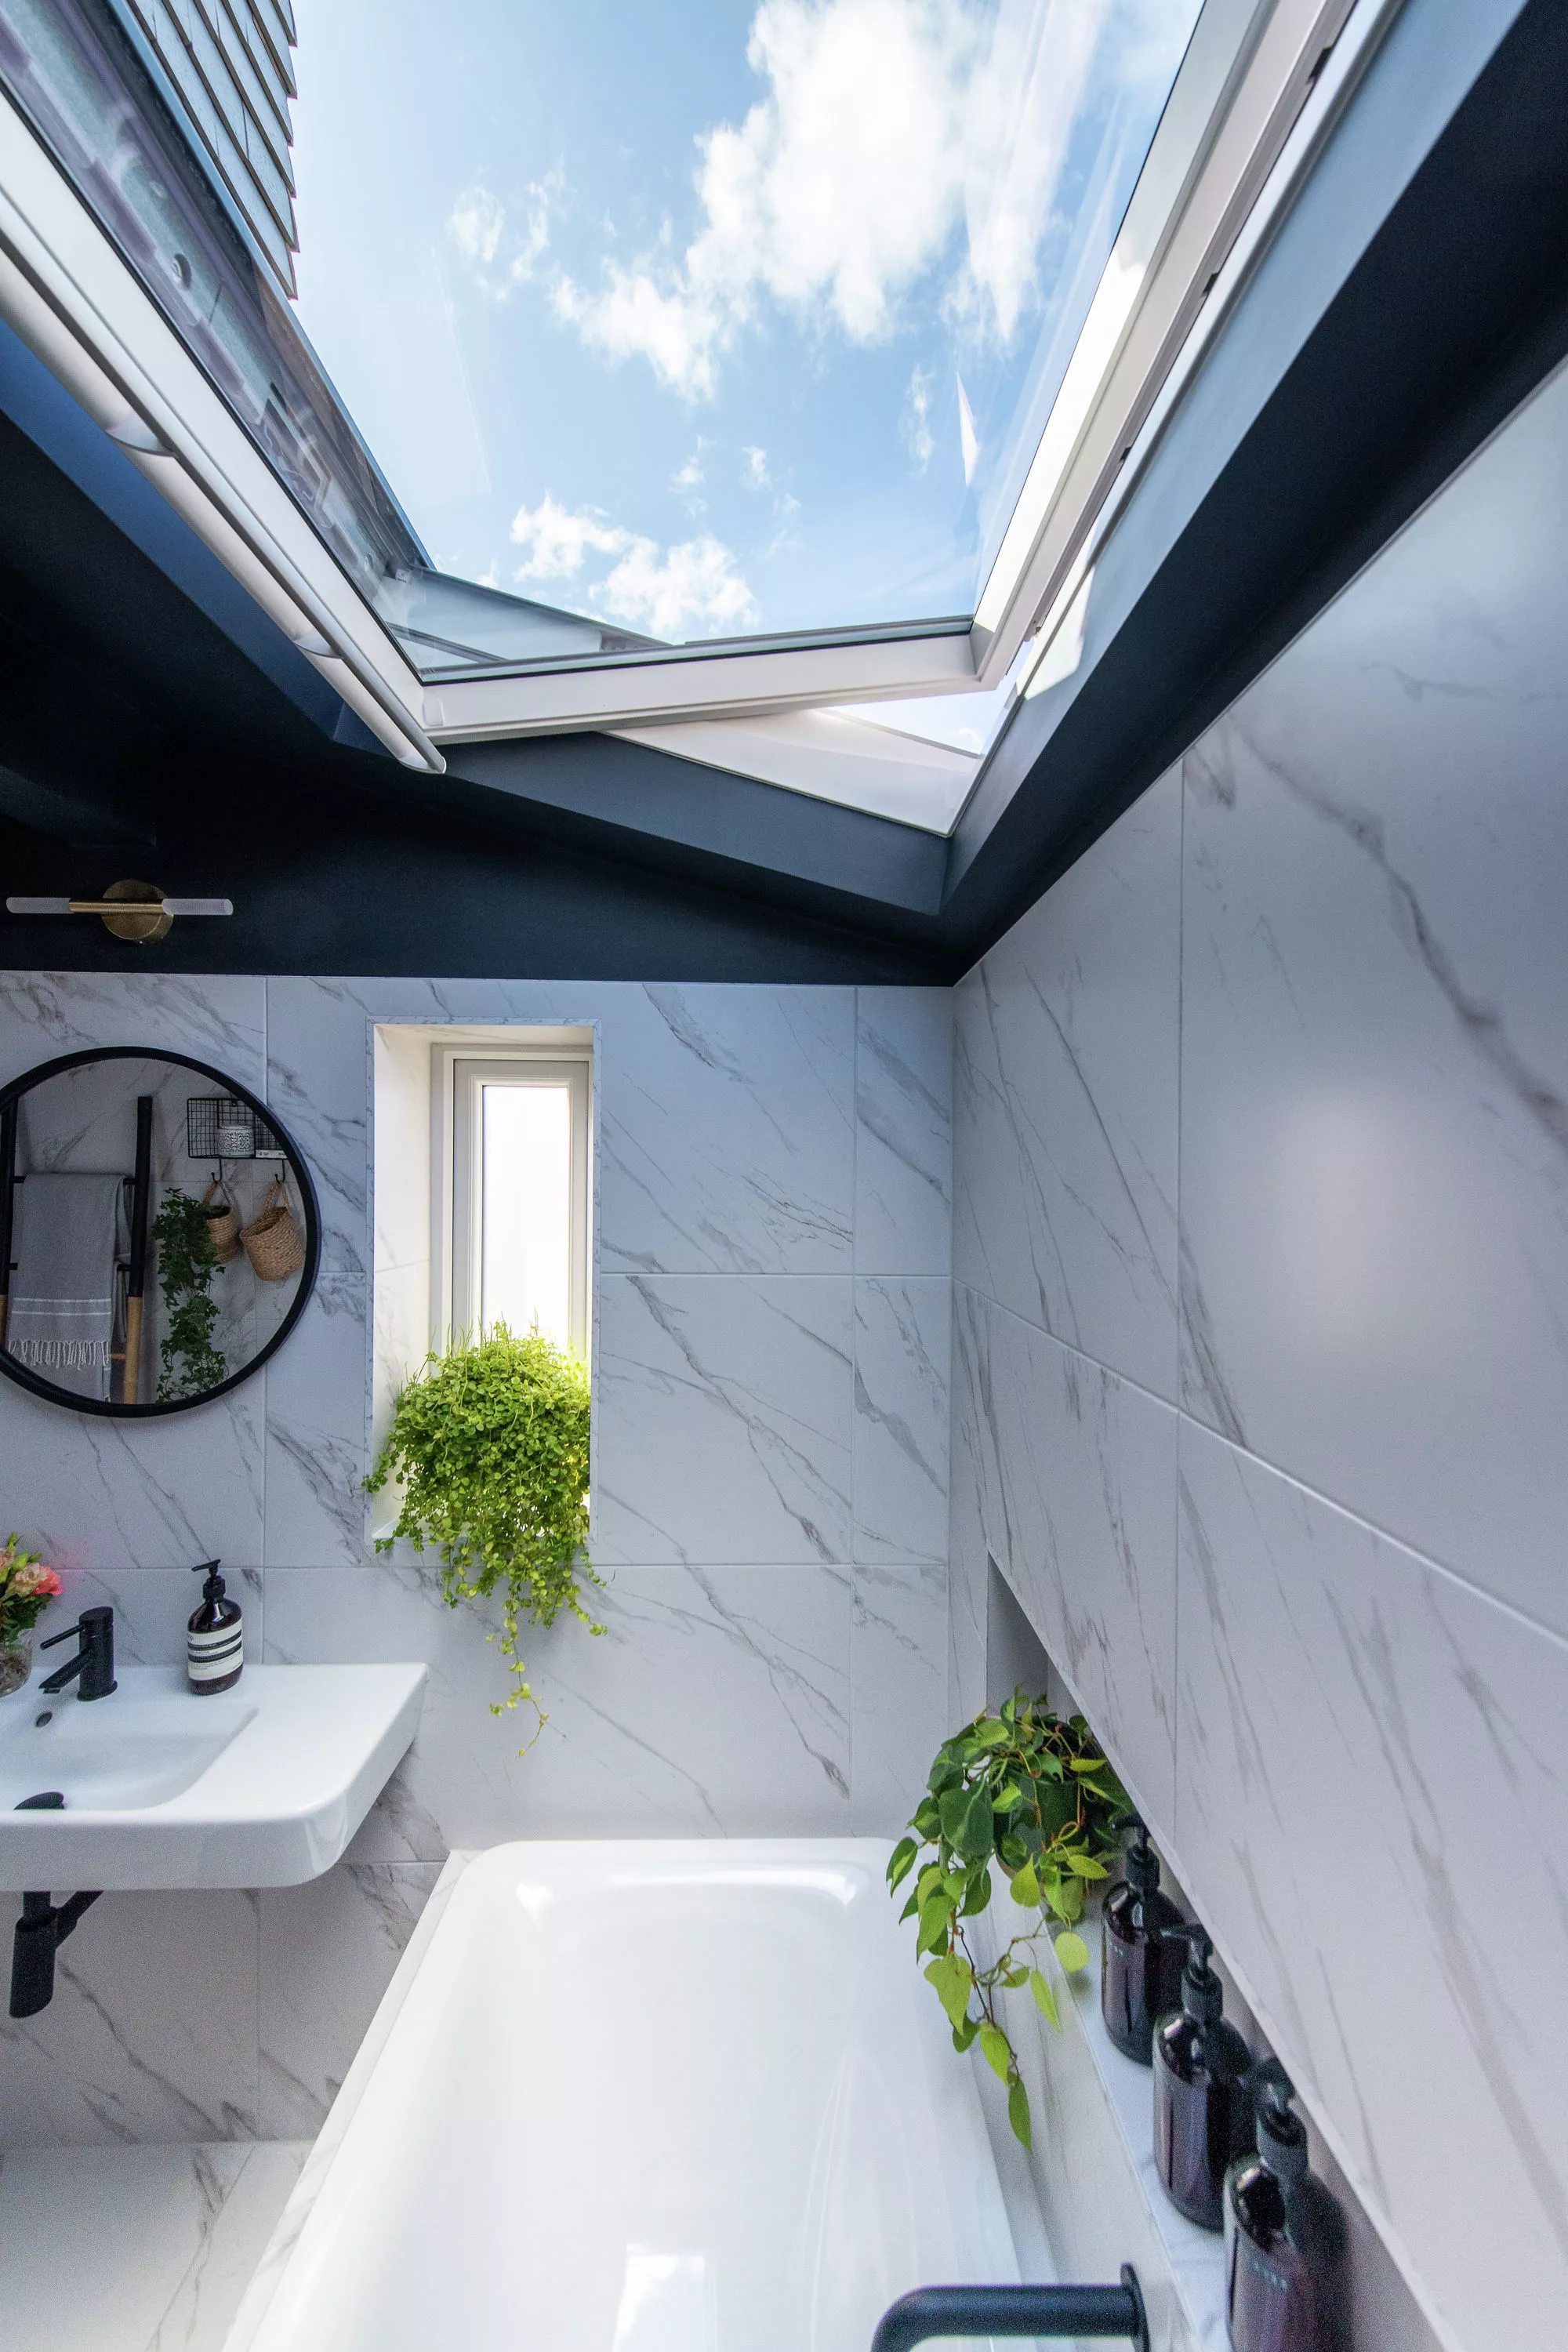 Luxurious marble bathroom with natural light from a VELUX skylight and green plants.